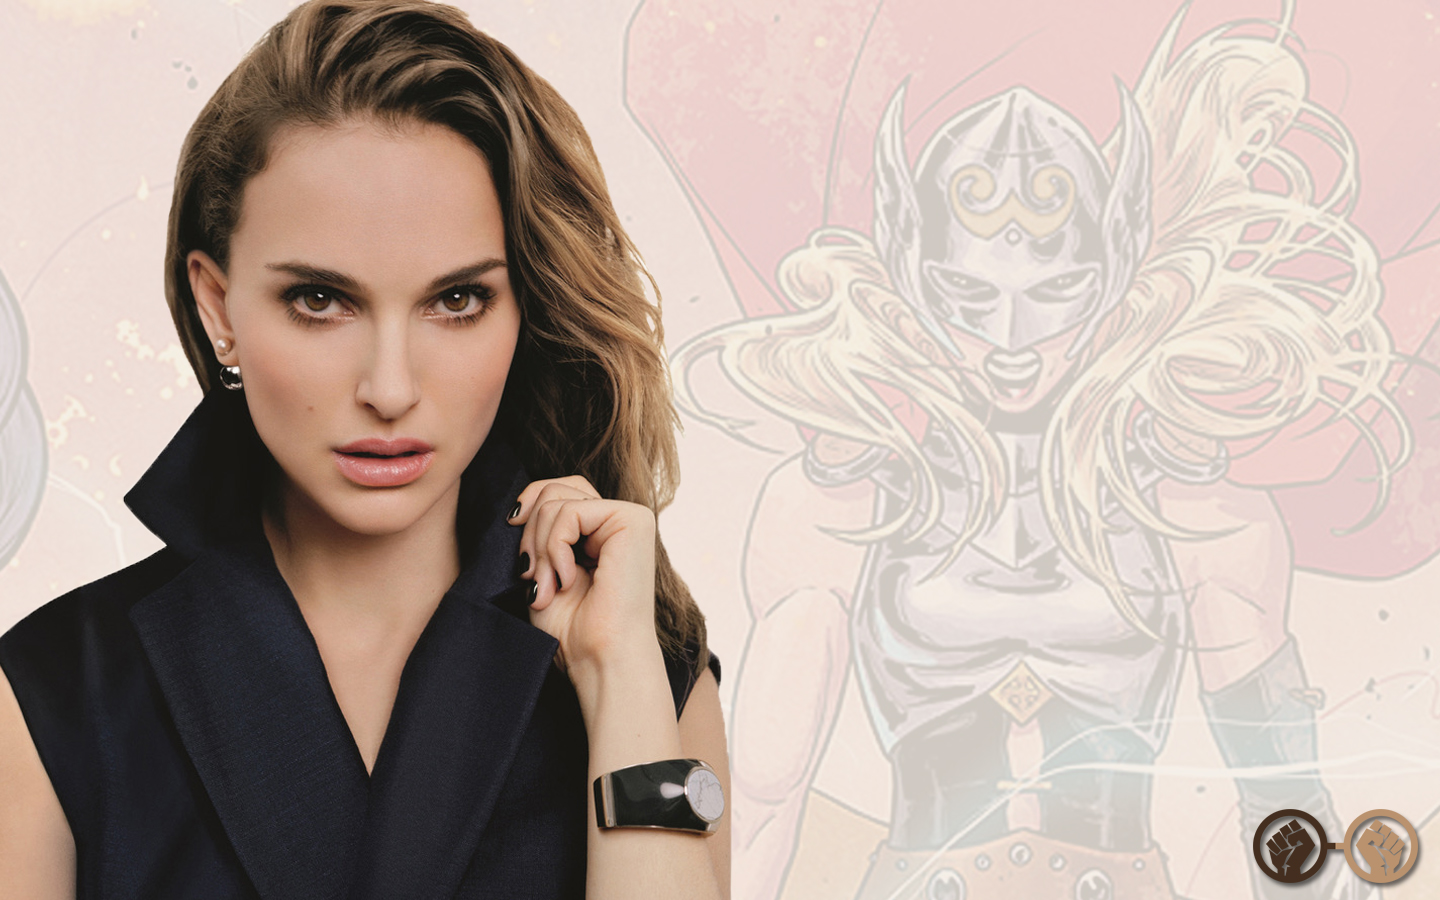 SDCC 2019: Natalie Portman to Reprise Her Role of Jane Foster and Wield Mjölnir